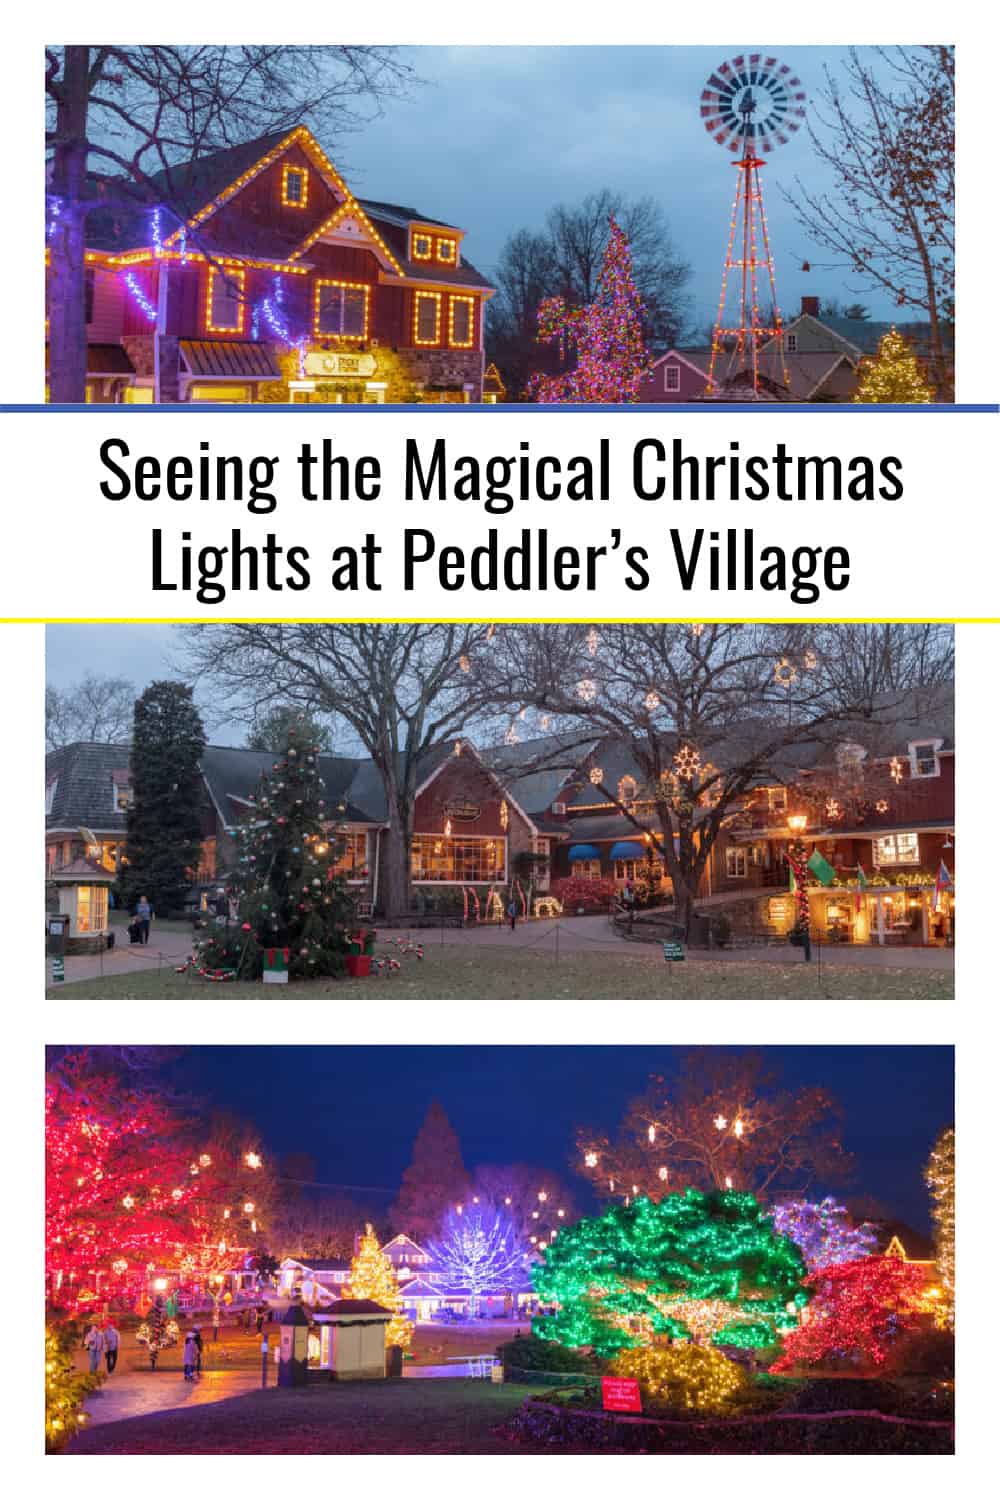 Seeing the Magical Christmas Lights at Peddler's Village in Bucks